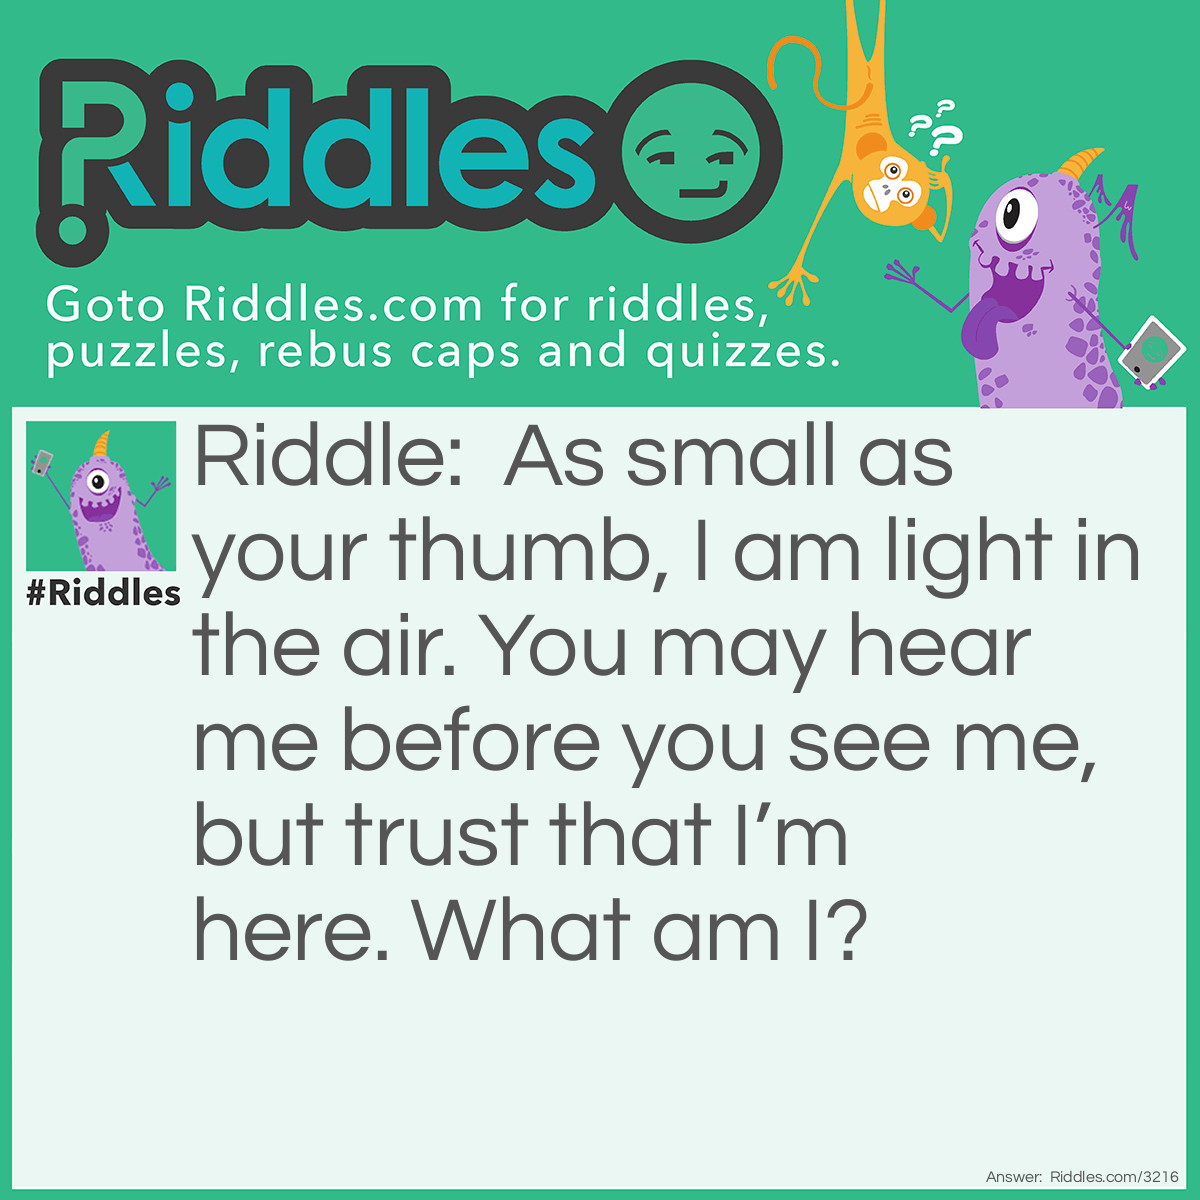 Riddle: As small as your thumb, I am light in the air. You may hear me before you see me, but trust that I'm here. What am I? Answer: A hummingbird